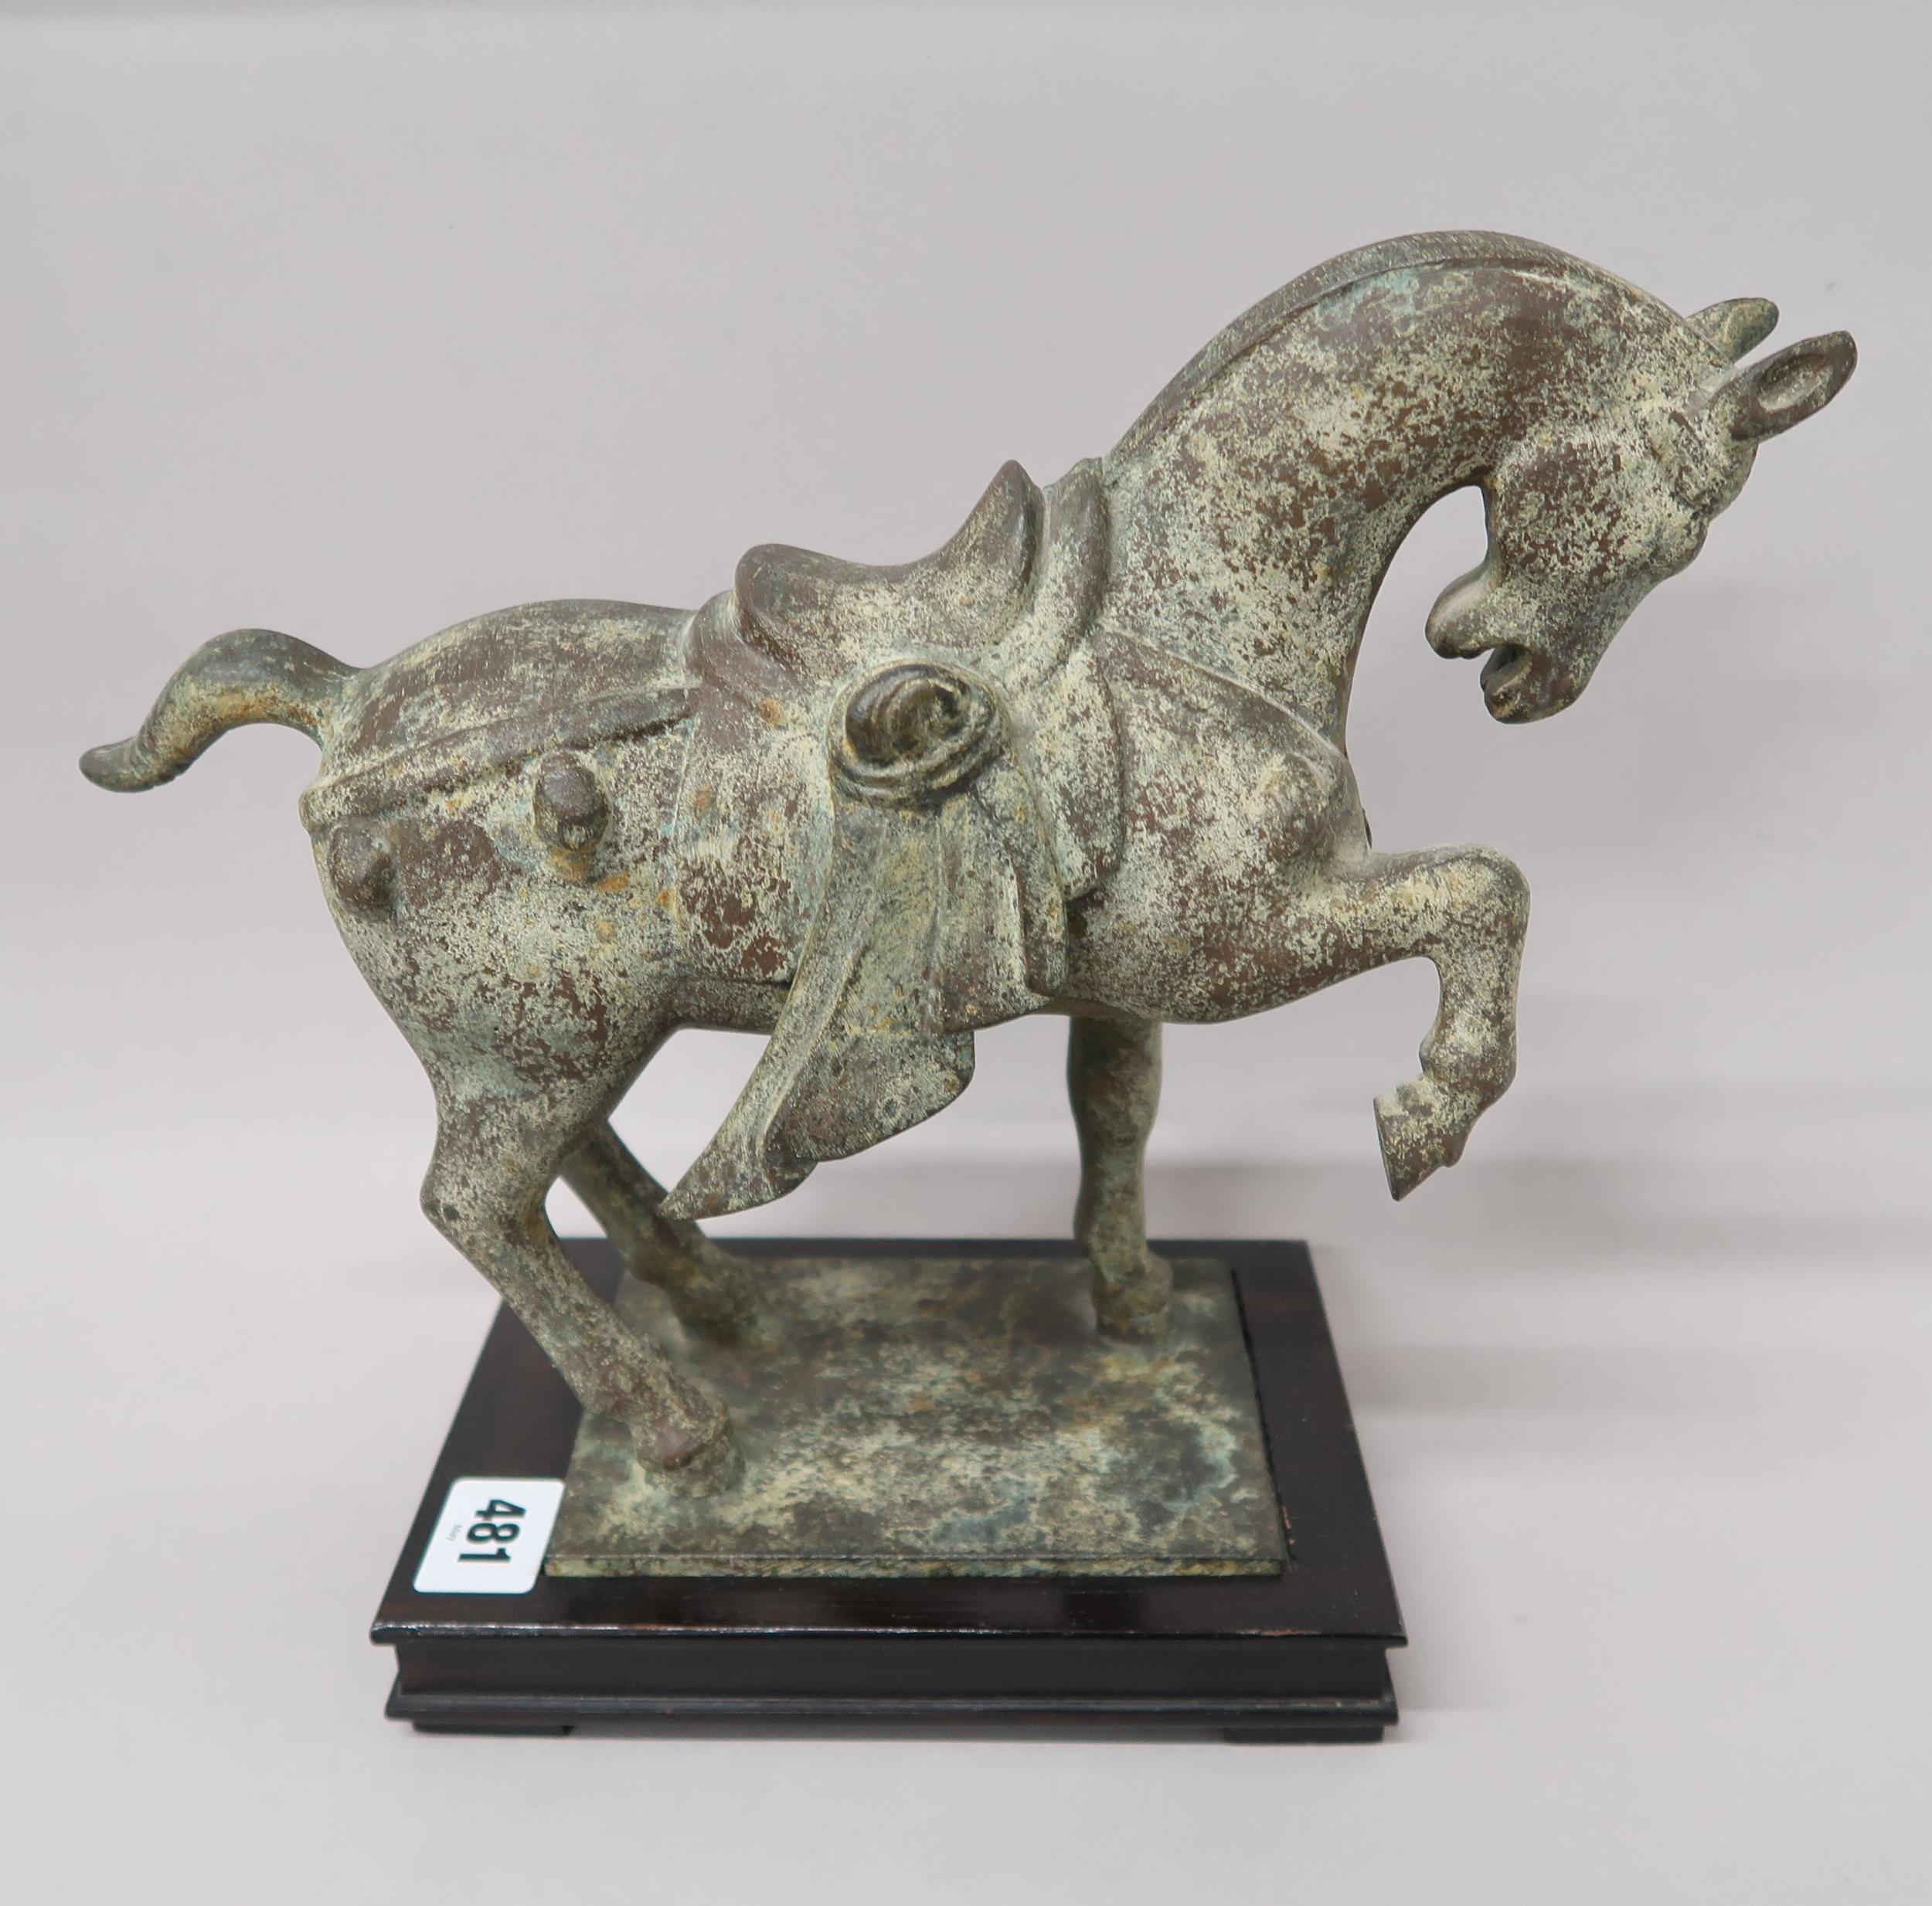 A bronze horse on stand - 27cm - Image 2 of 2